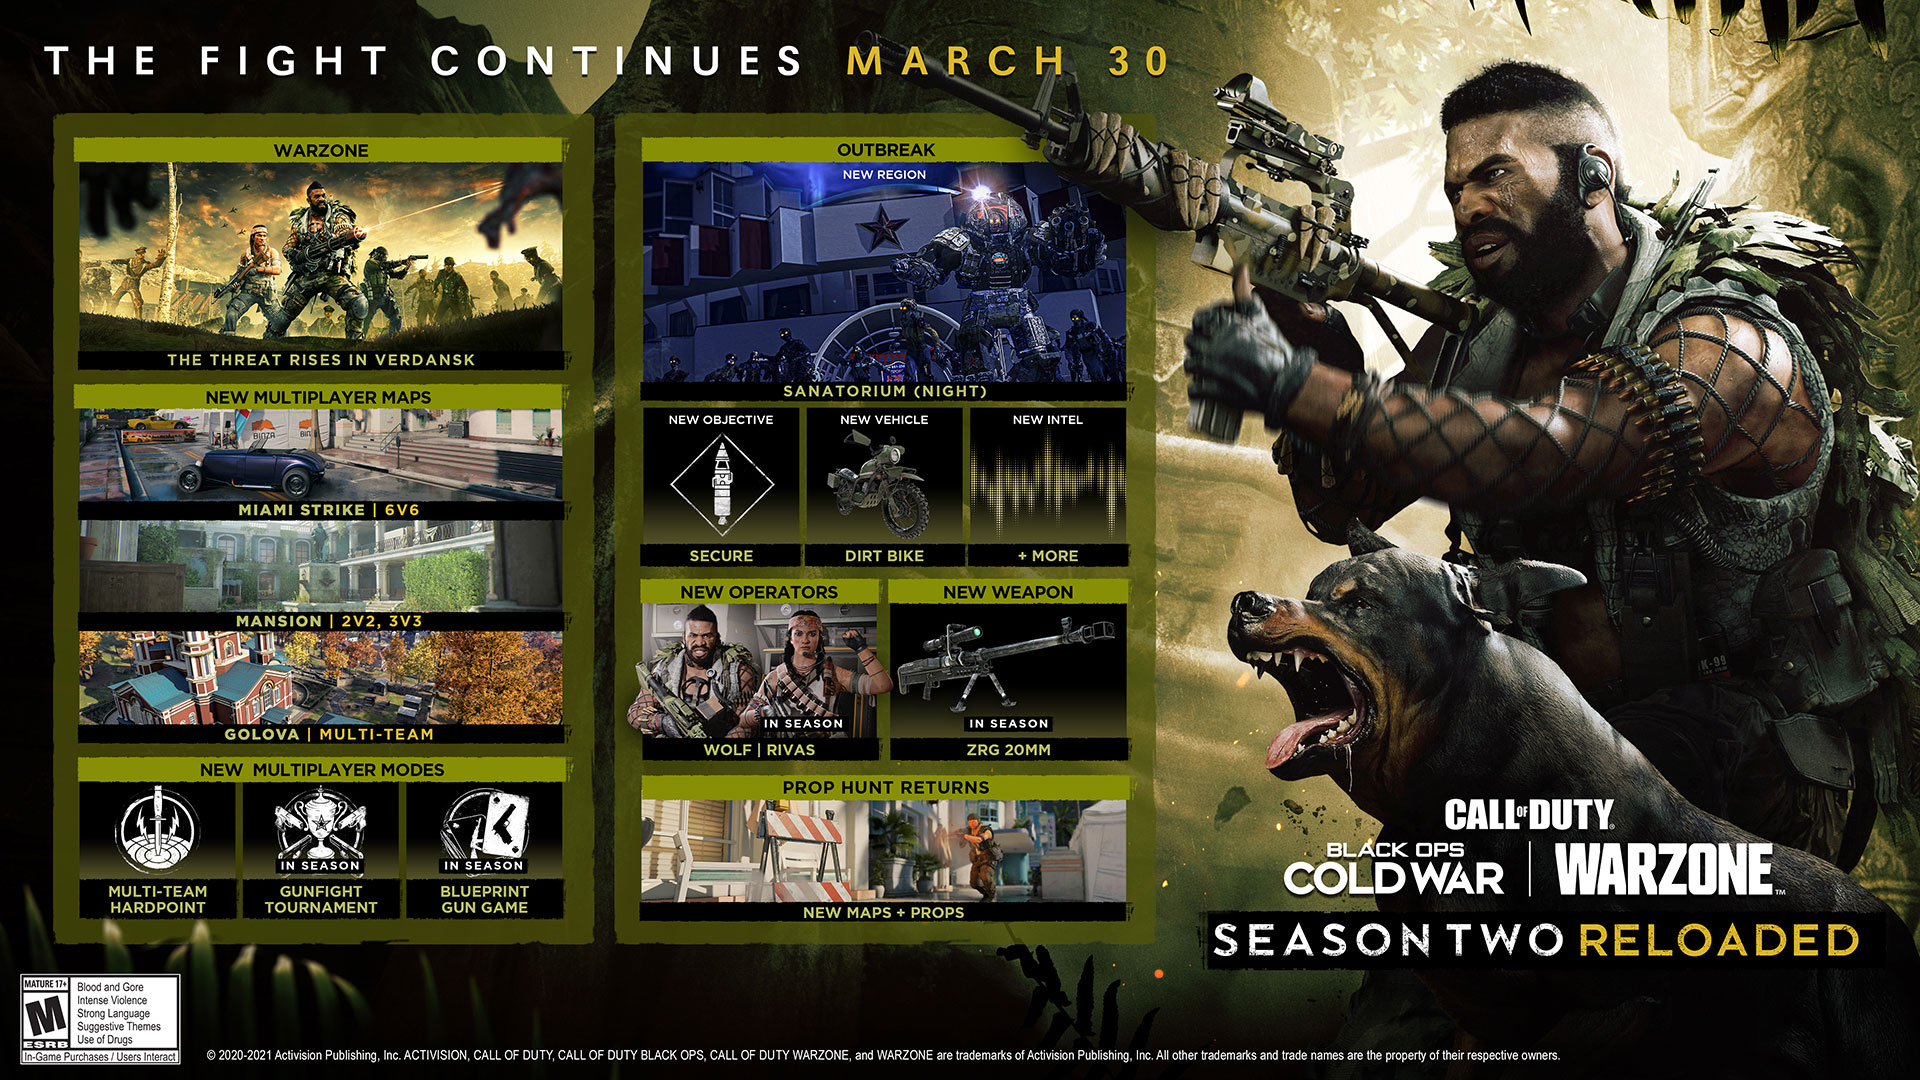 Season Two Reloaded Roadmap (Image: Activision)